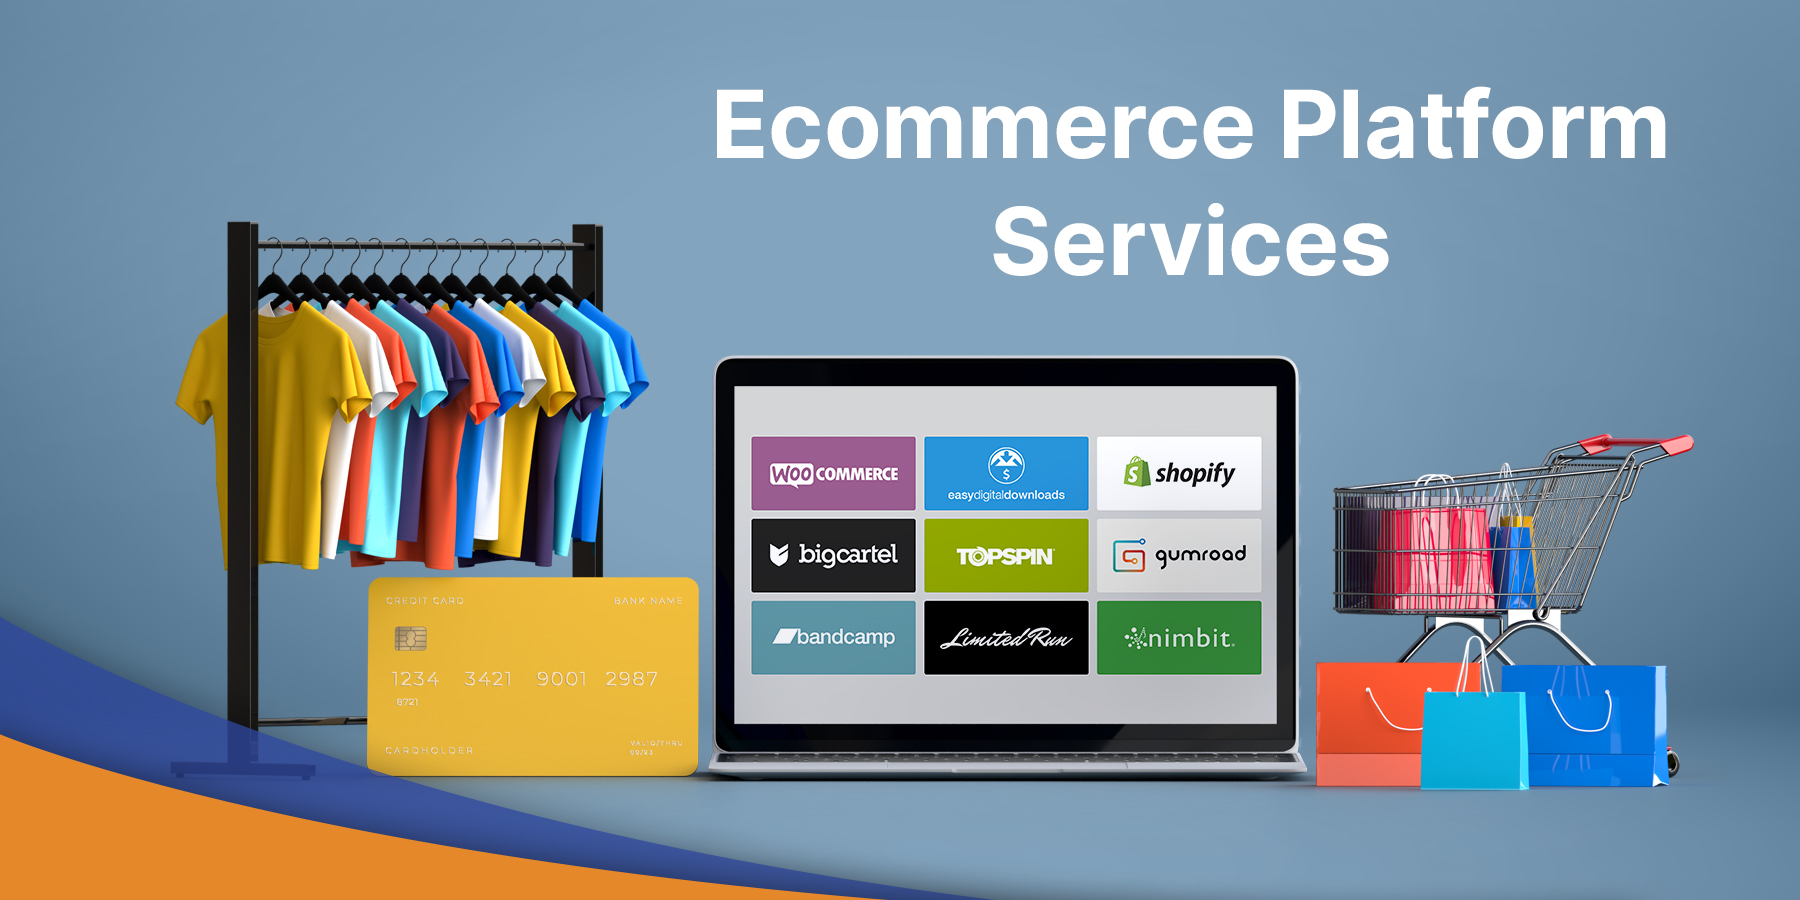 What are eCommerce Platform Service